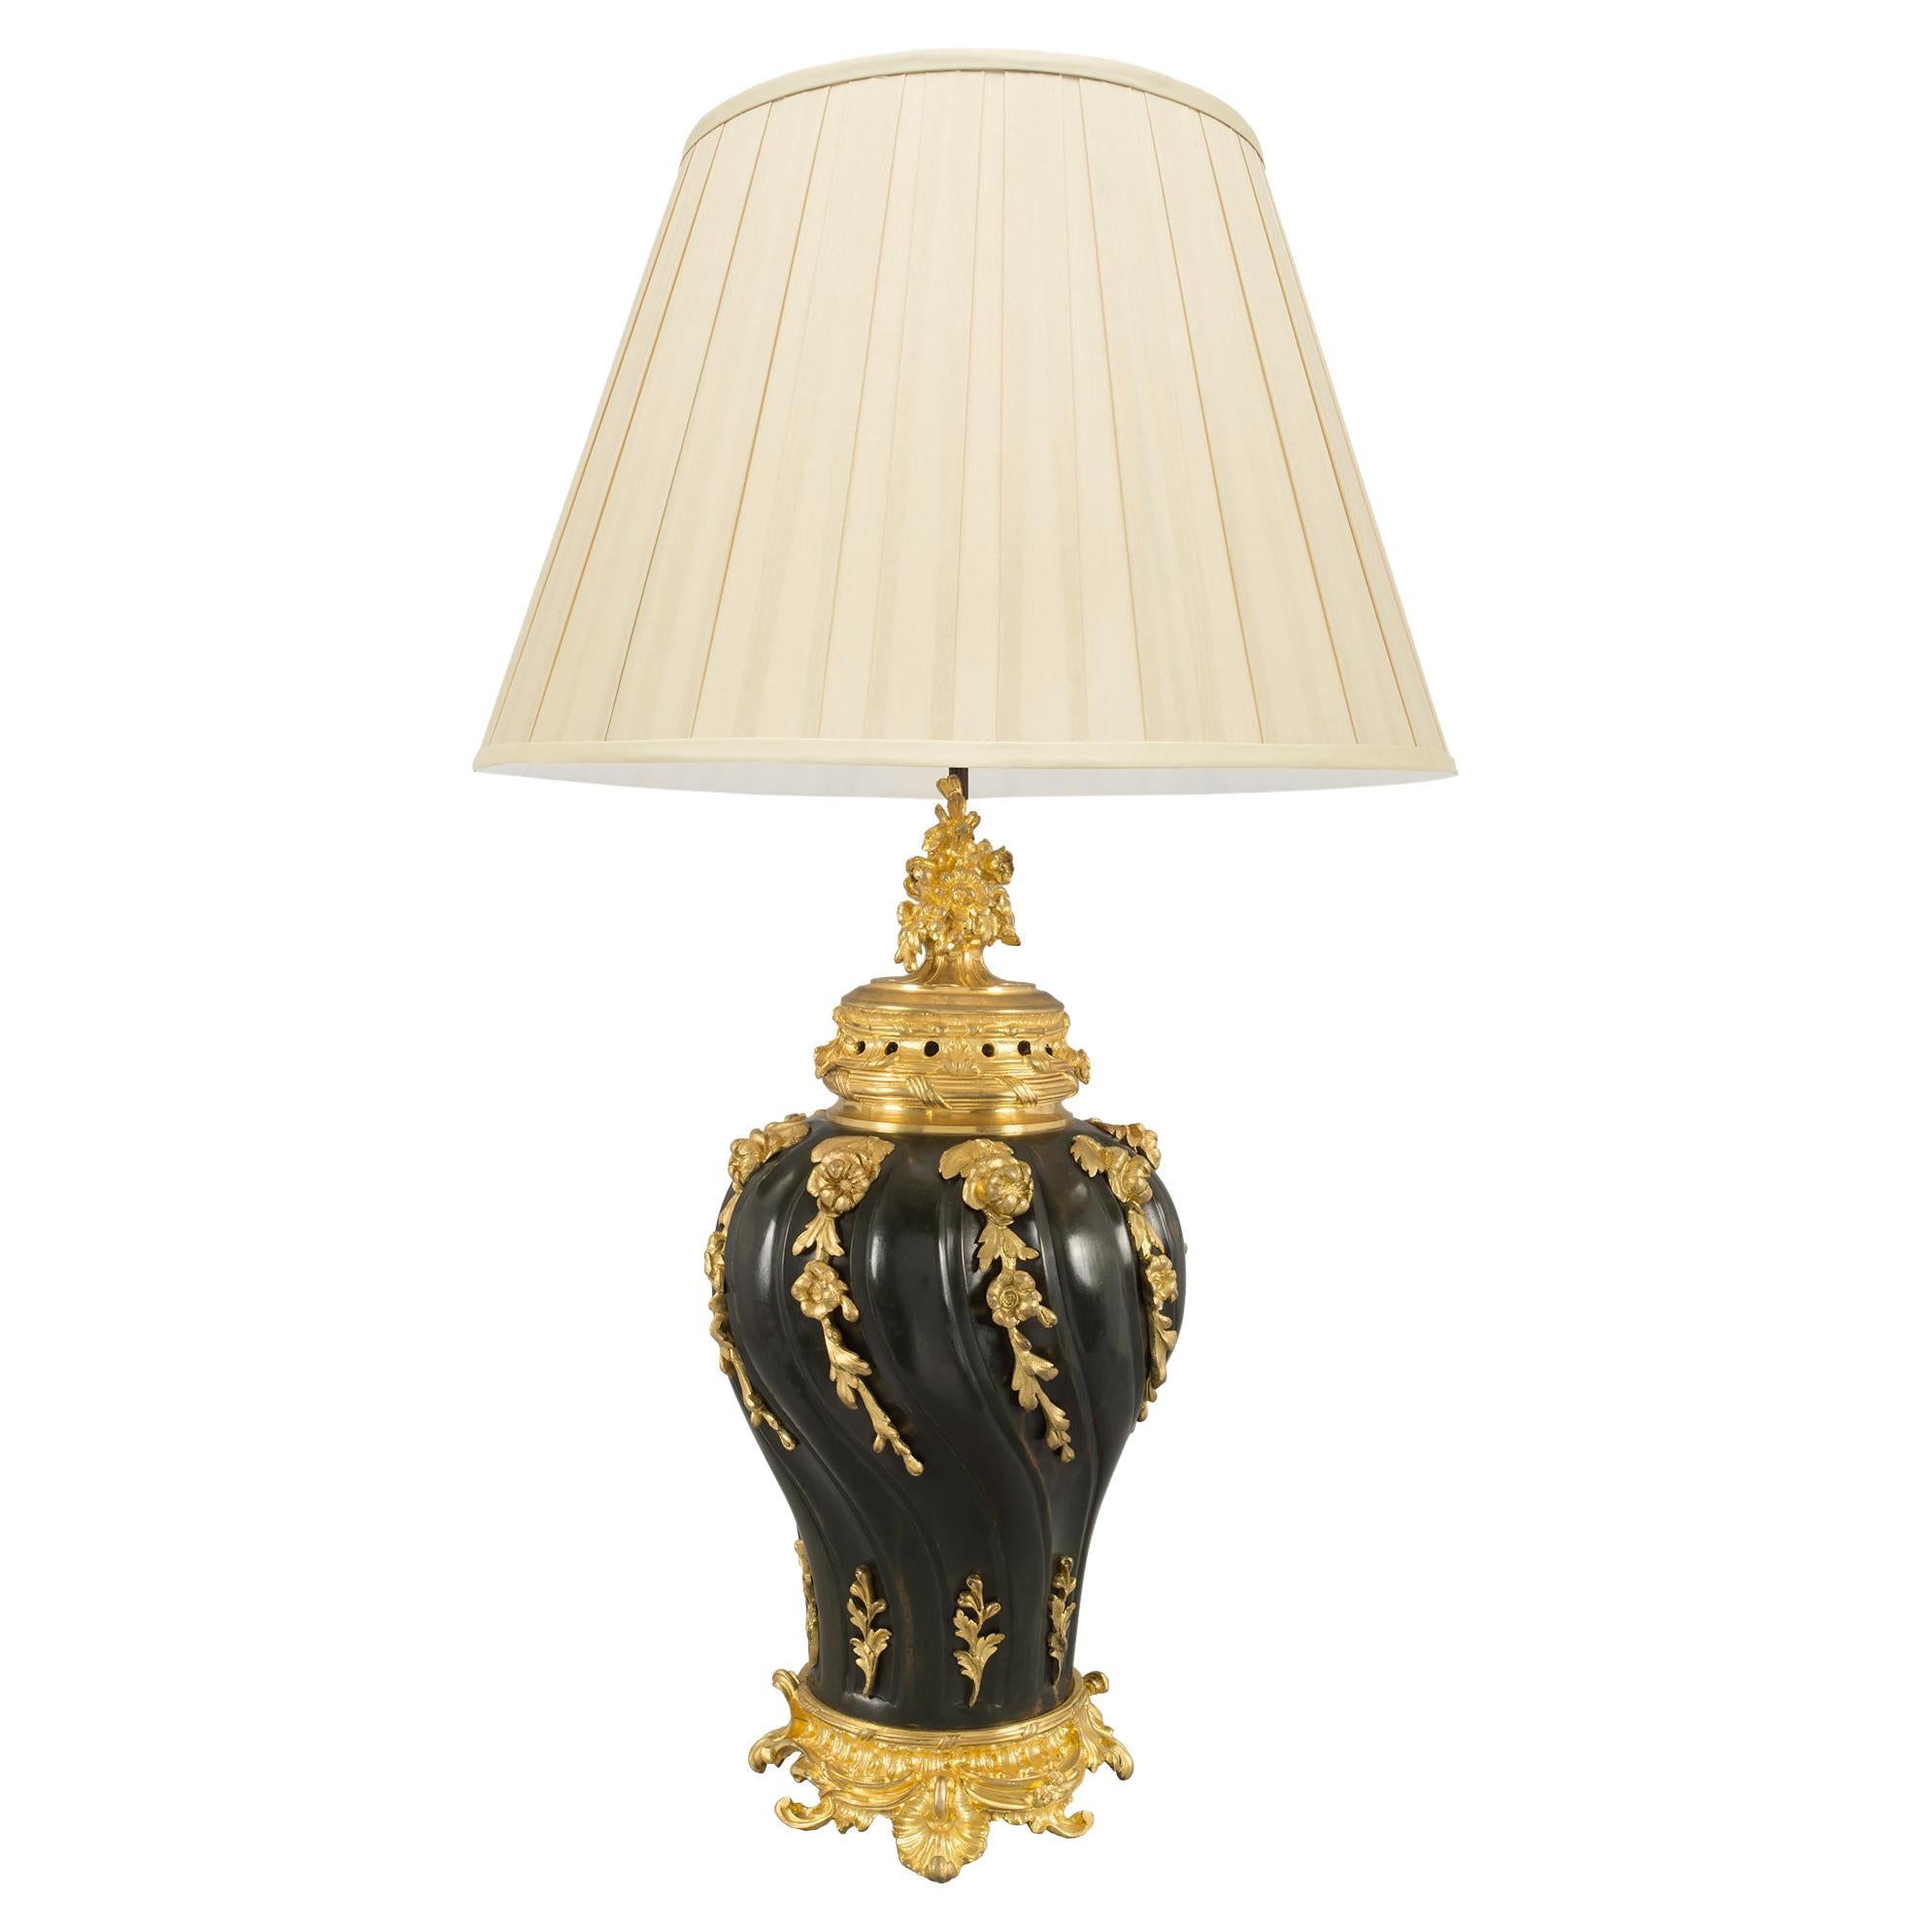 French 19th Century Louis XV Style Patinated Bronze and Ormolu Lamp